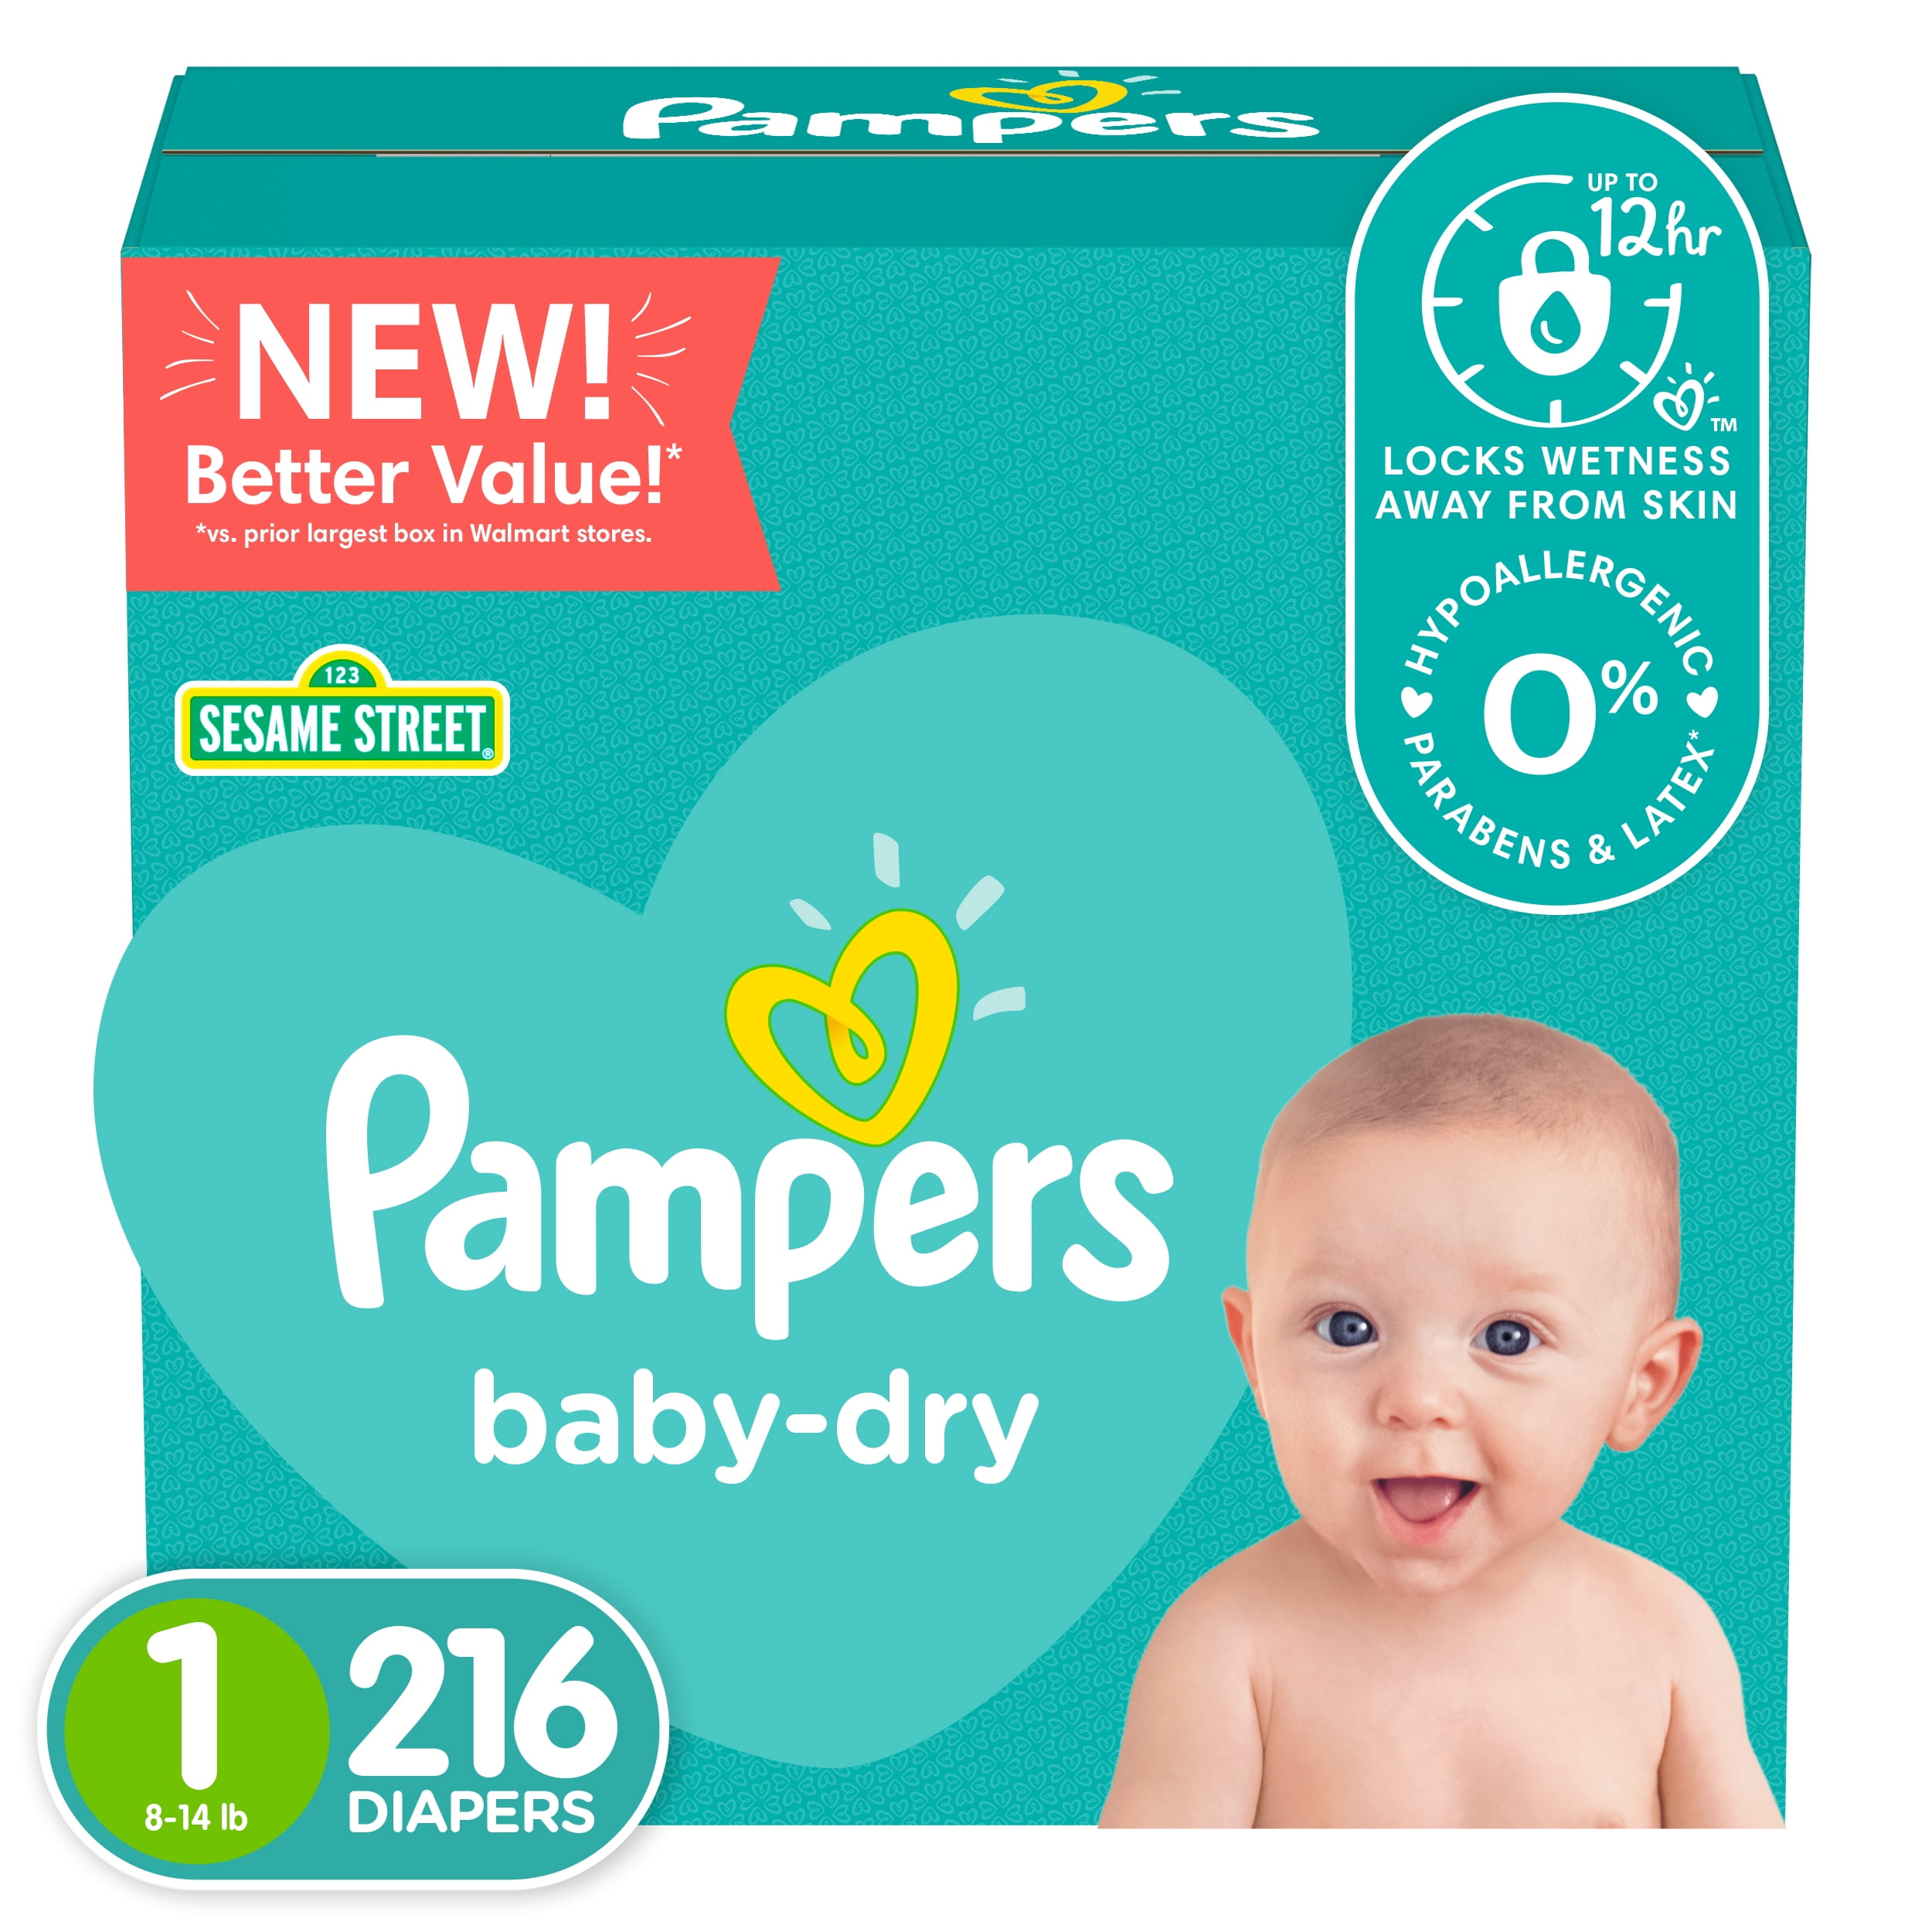 salon Edelsteen Mijlpaal Pampers Baby-Dry Extra Protection Diapers, Size 1, 216 Count - Walmart.com